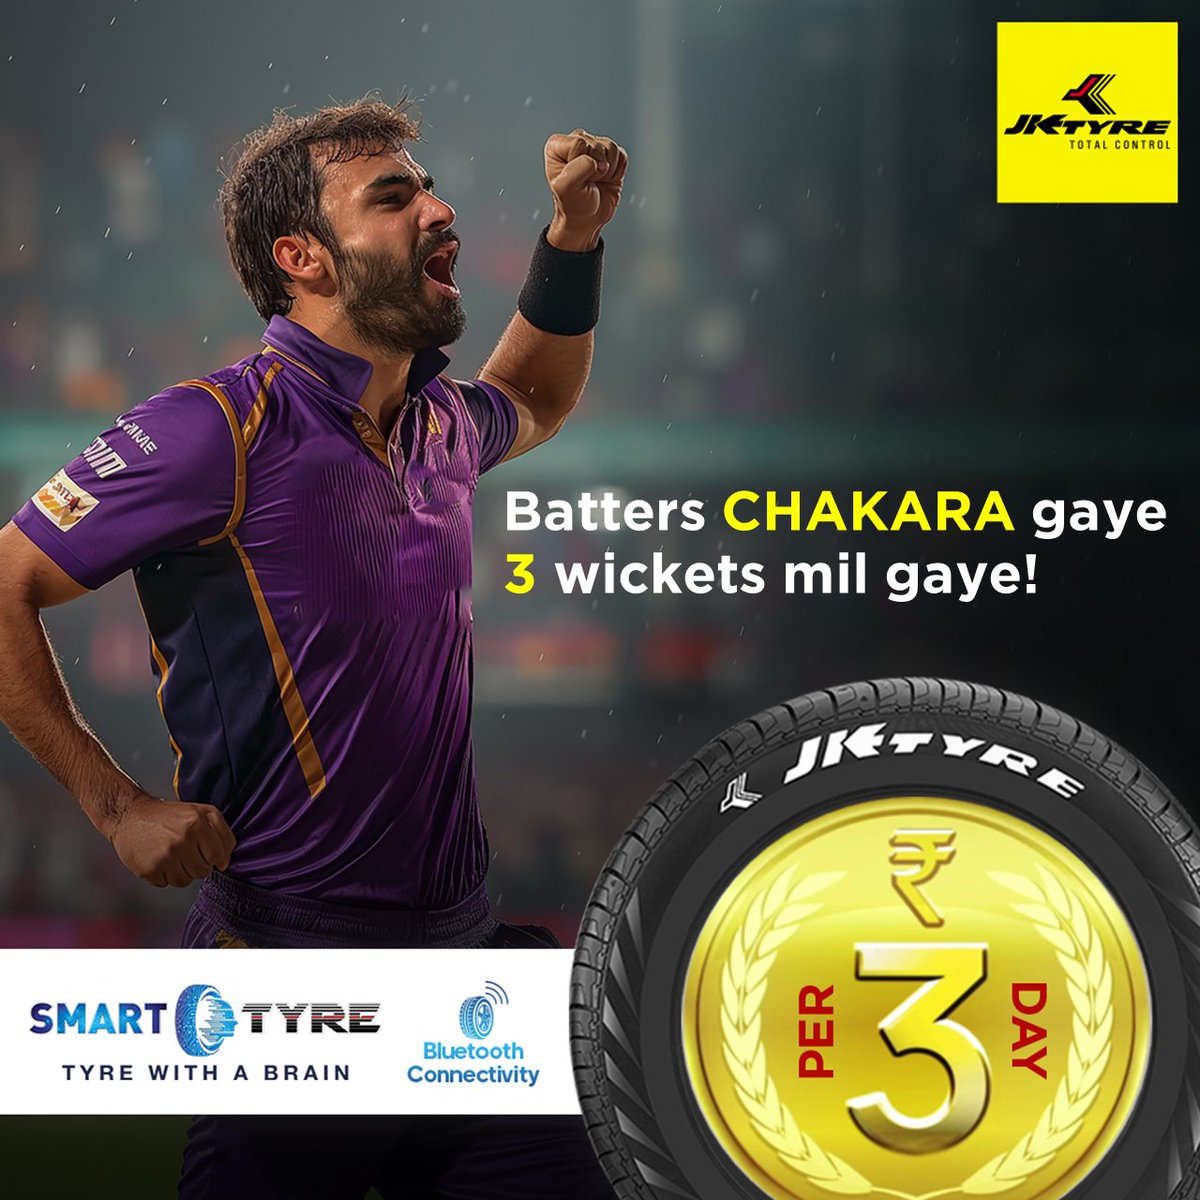 Bowling so smart, it swept apart the opposition, just like a ride with #TyreWithABrain Check out #SmartTyre from JK Tyre at ₹3/day to connect via Bluetooth and get tyre health updates in real-time. #JKTyre #IndianT20League #Kolkata #Delhi